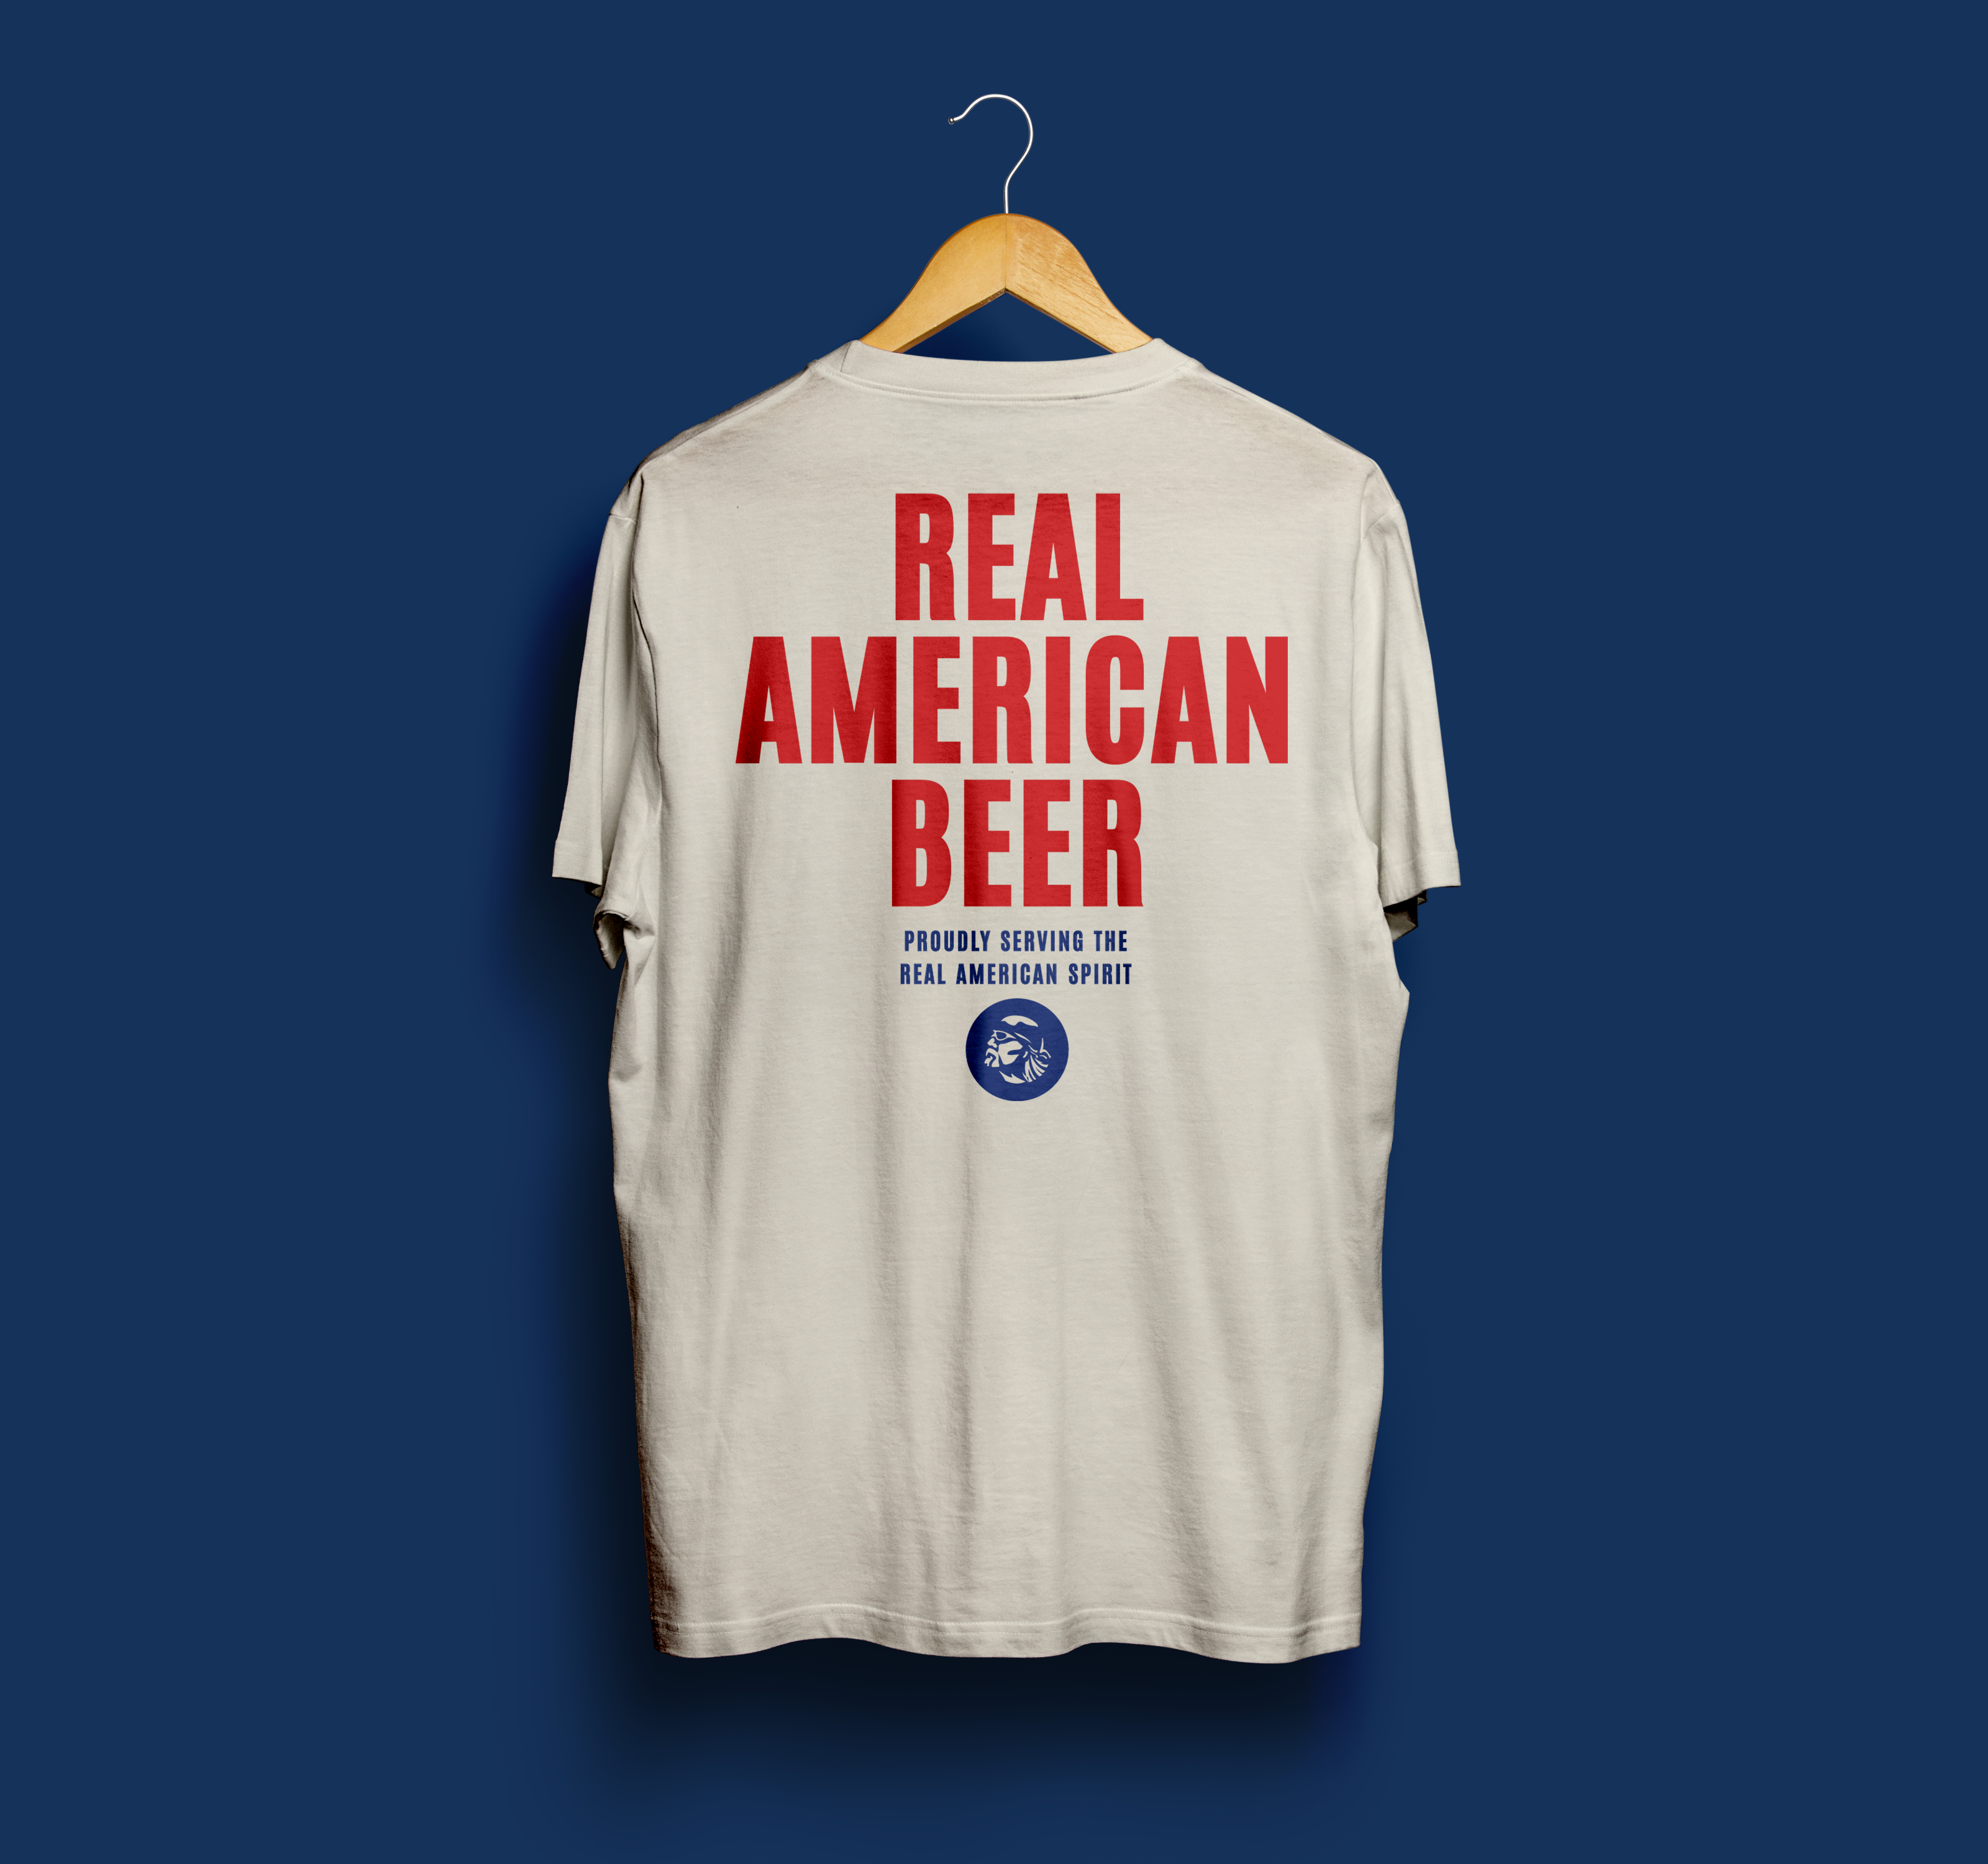 Back – "REAL AMERICAN BEER" on off-white tee